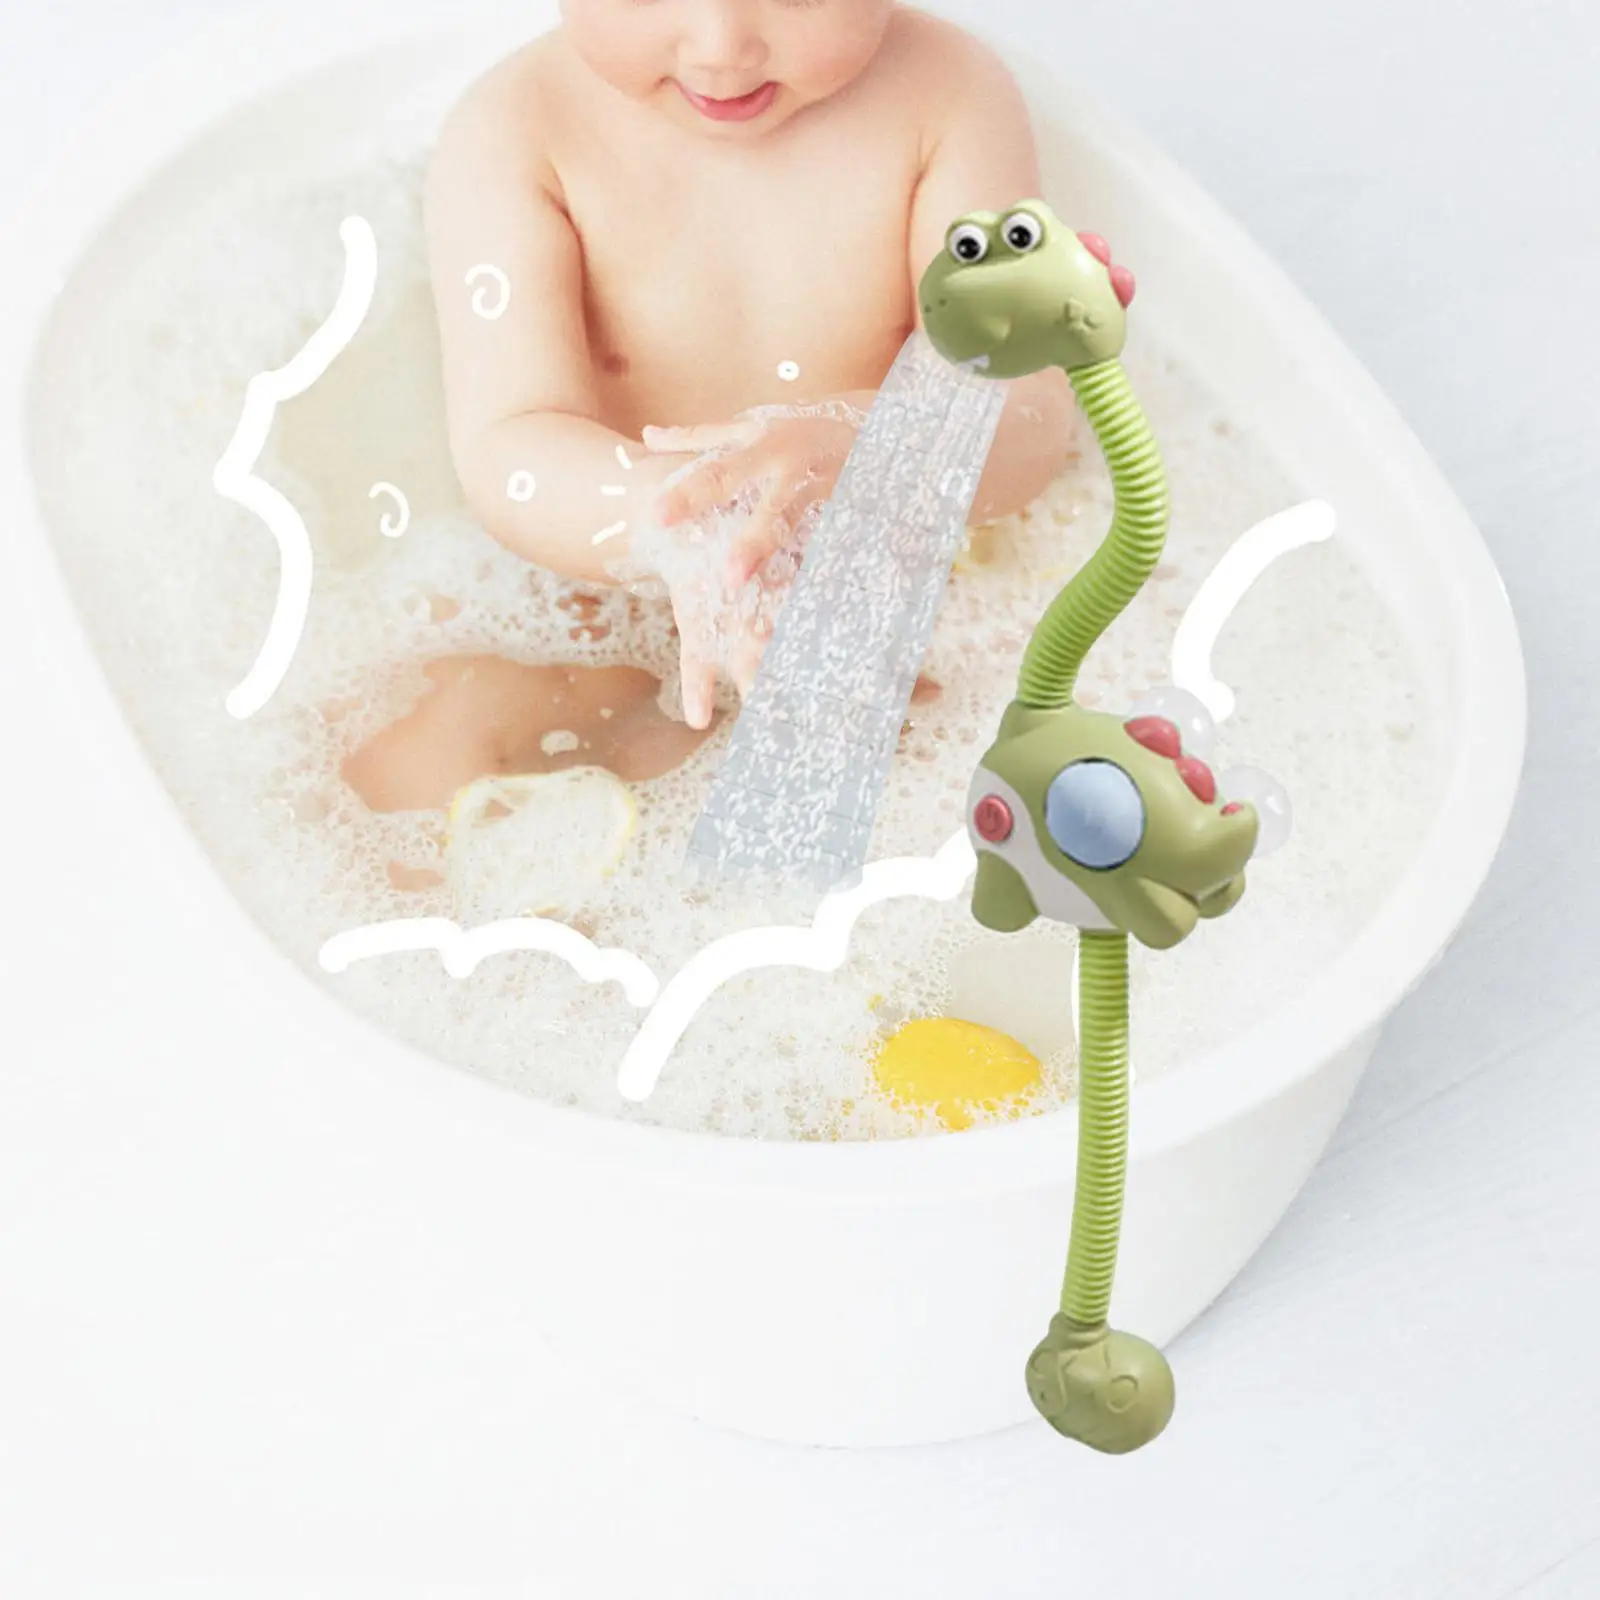 Infant Electric Shower Automatic Water Pump with Hand Shower Bathtub Toy for Bathroom Birthday Gift Infants Toddles Kids